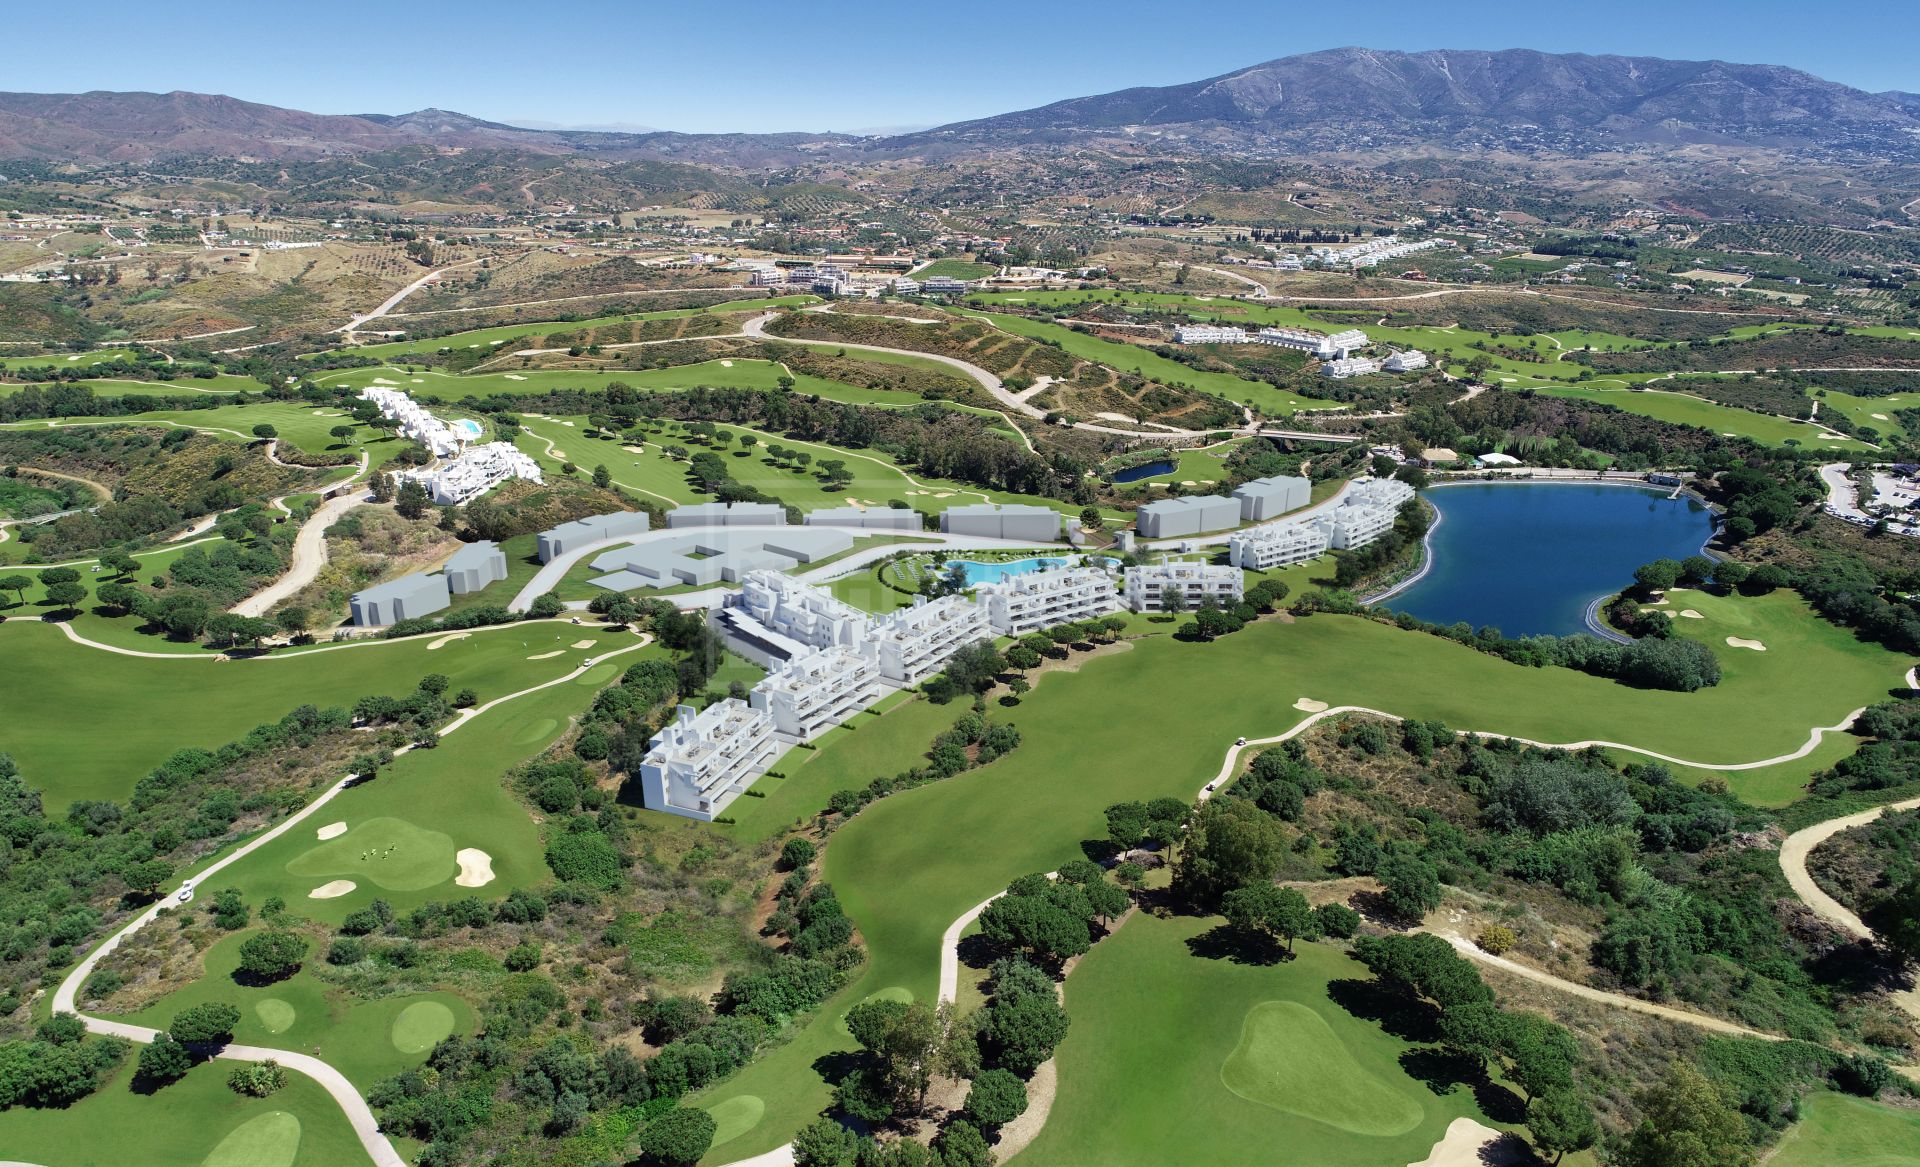 SOLANA VILLAGE - THE PERFECT HOMES FOR GOLF & NATURE LOVERS IN LA CALA